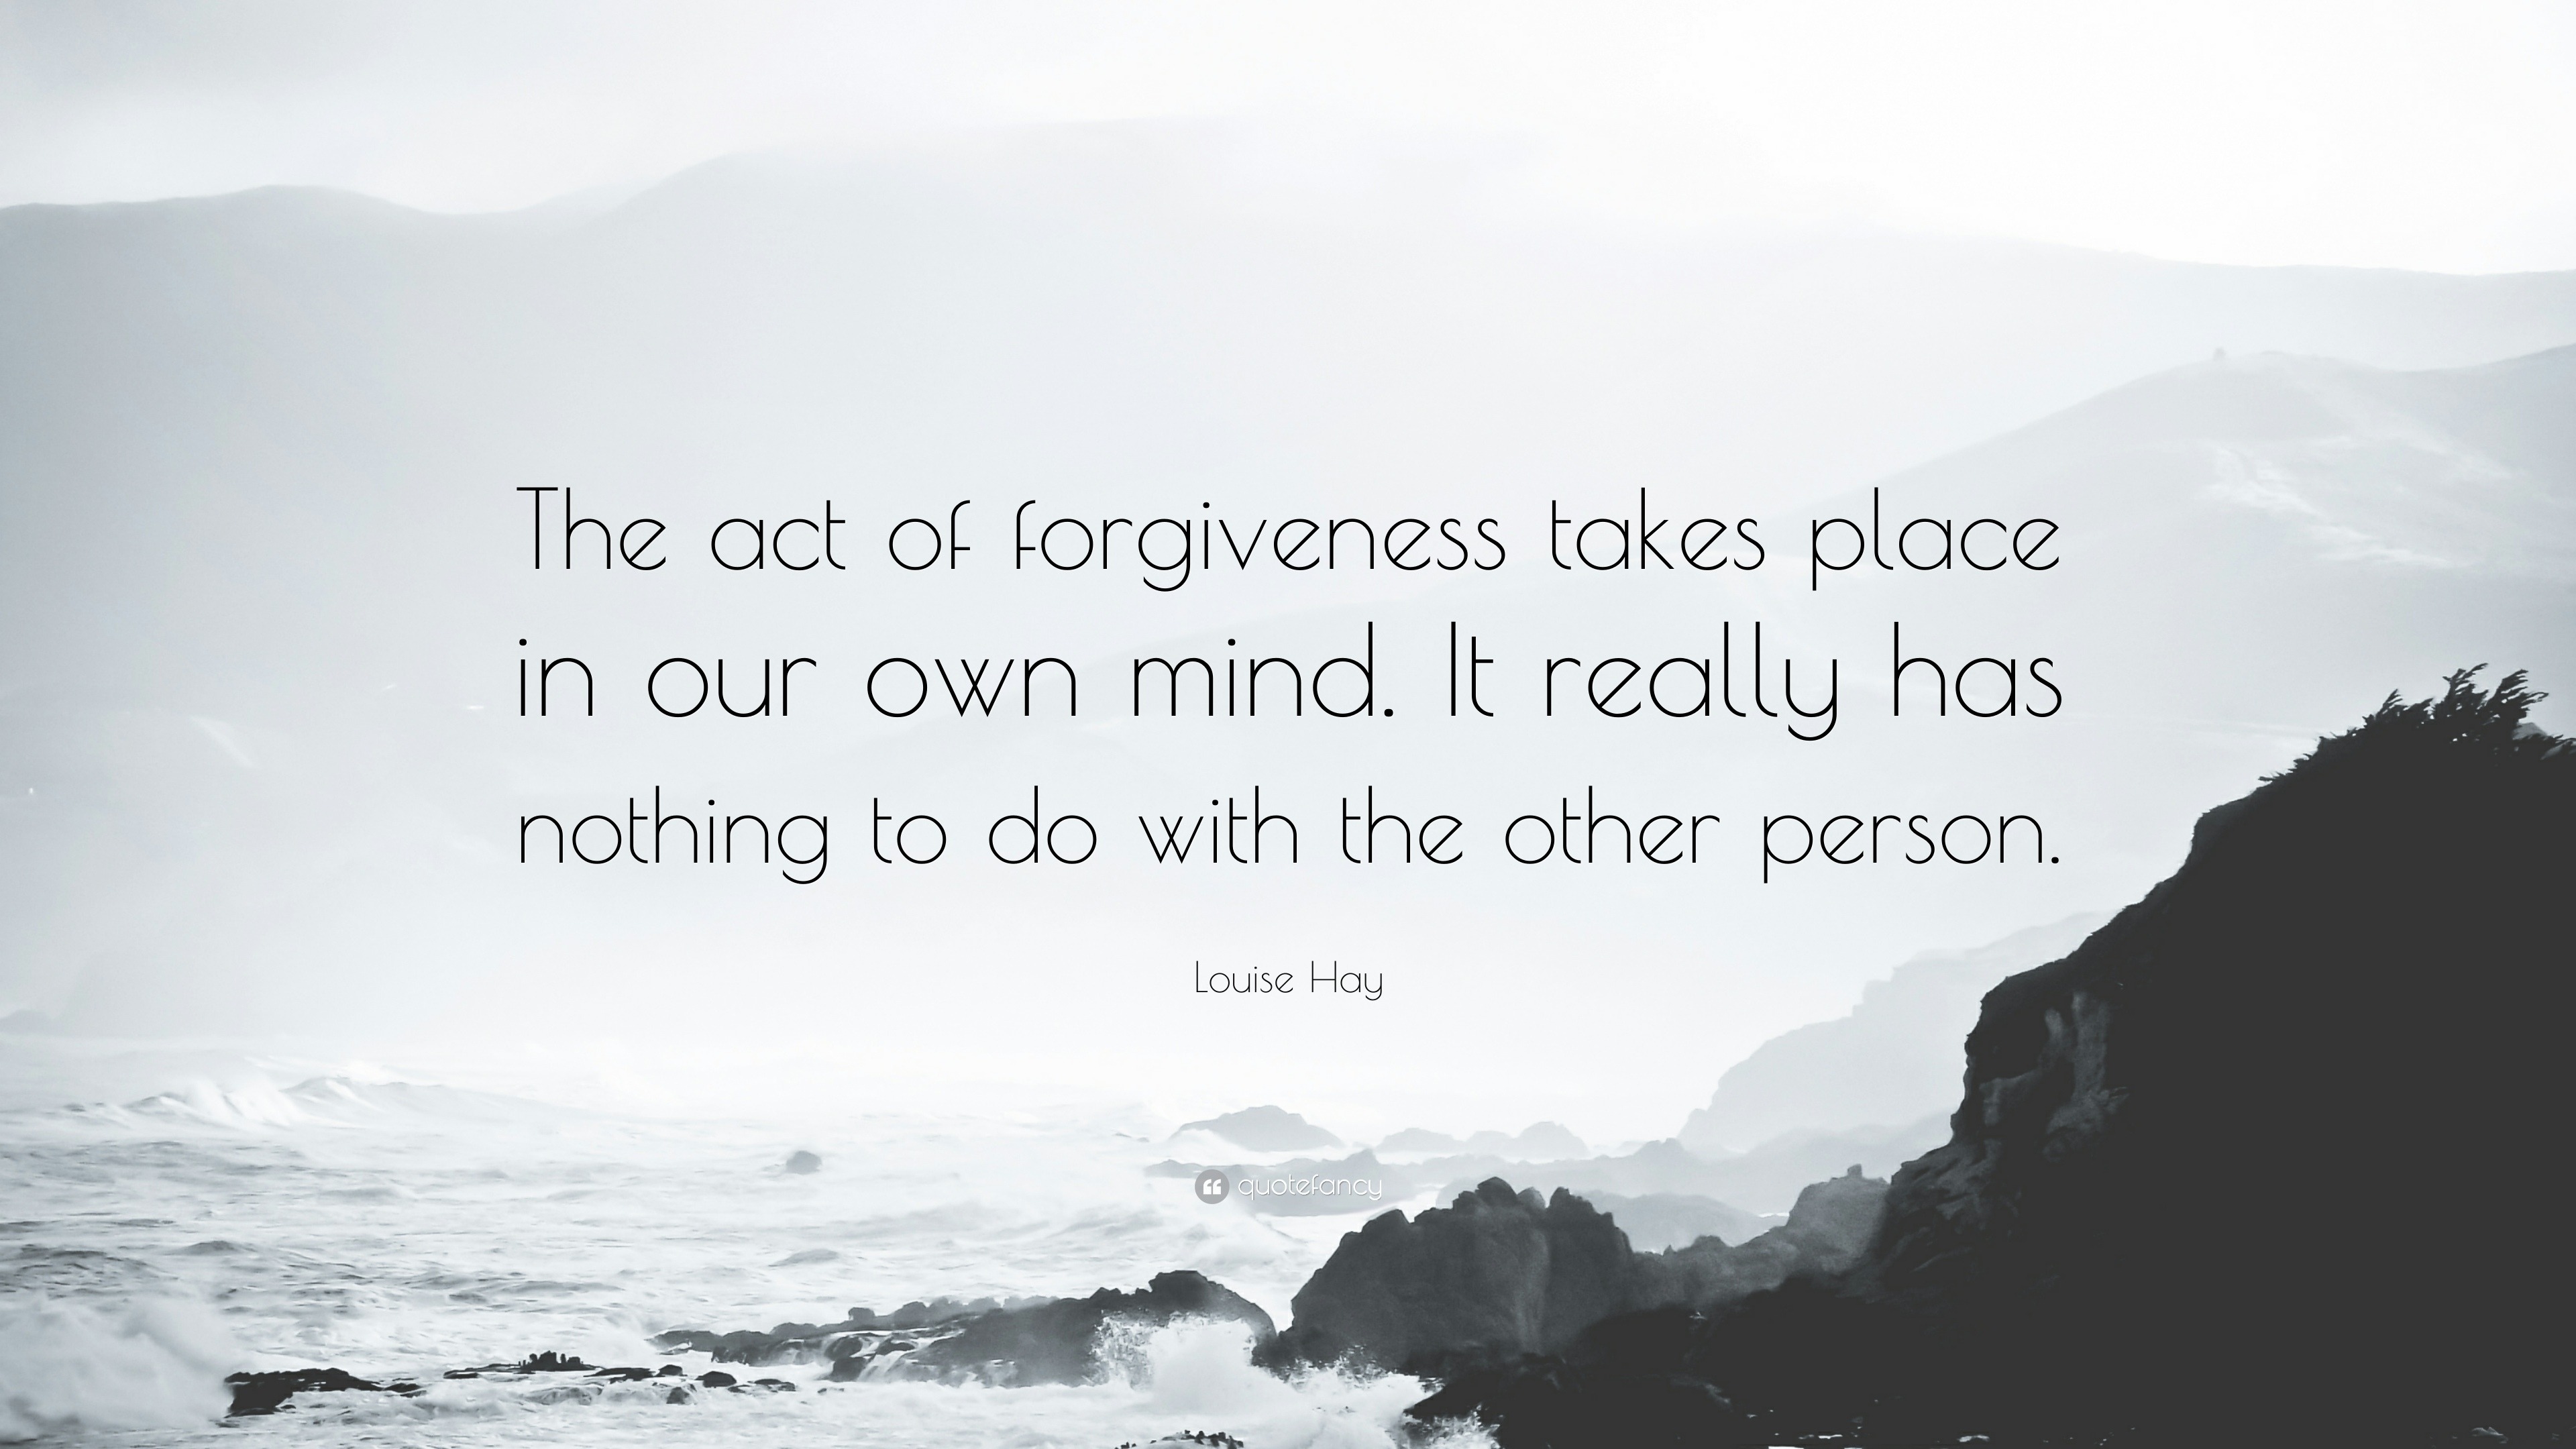 Louise Hay Quote: “The act of forgiveness takes place in our own mind. It really has nothing to ...